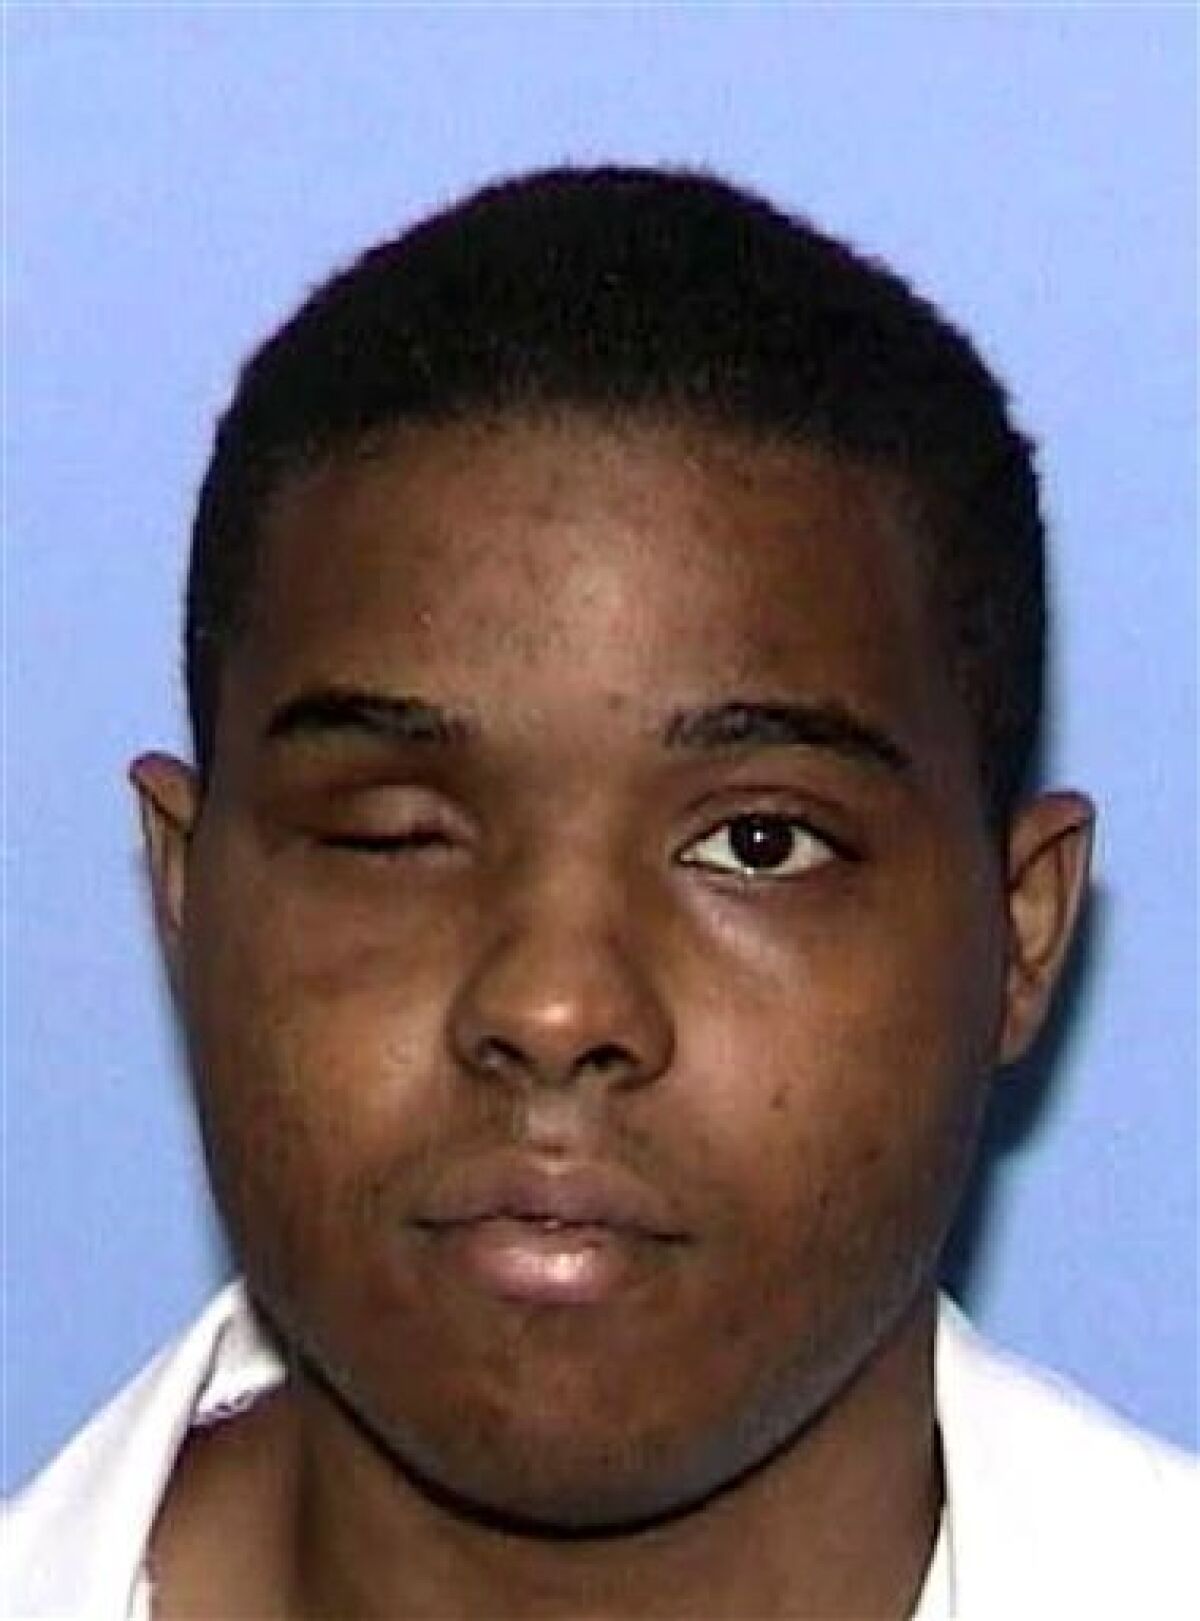 Texas death row inmate Andre Thomas is shown in this undated handout file photo released Friday, Jan. 9, 2009 in Huntsville, Texas. Thomas, who has a history of mental problems is being treated at a prison psychiatric unit after authorities said he pulled out his only good eye and ate it. He similarly had plucked out his right eye before his trial in 2004. (AP Photo/Texas Department of Criminal Justice, FILE)